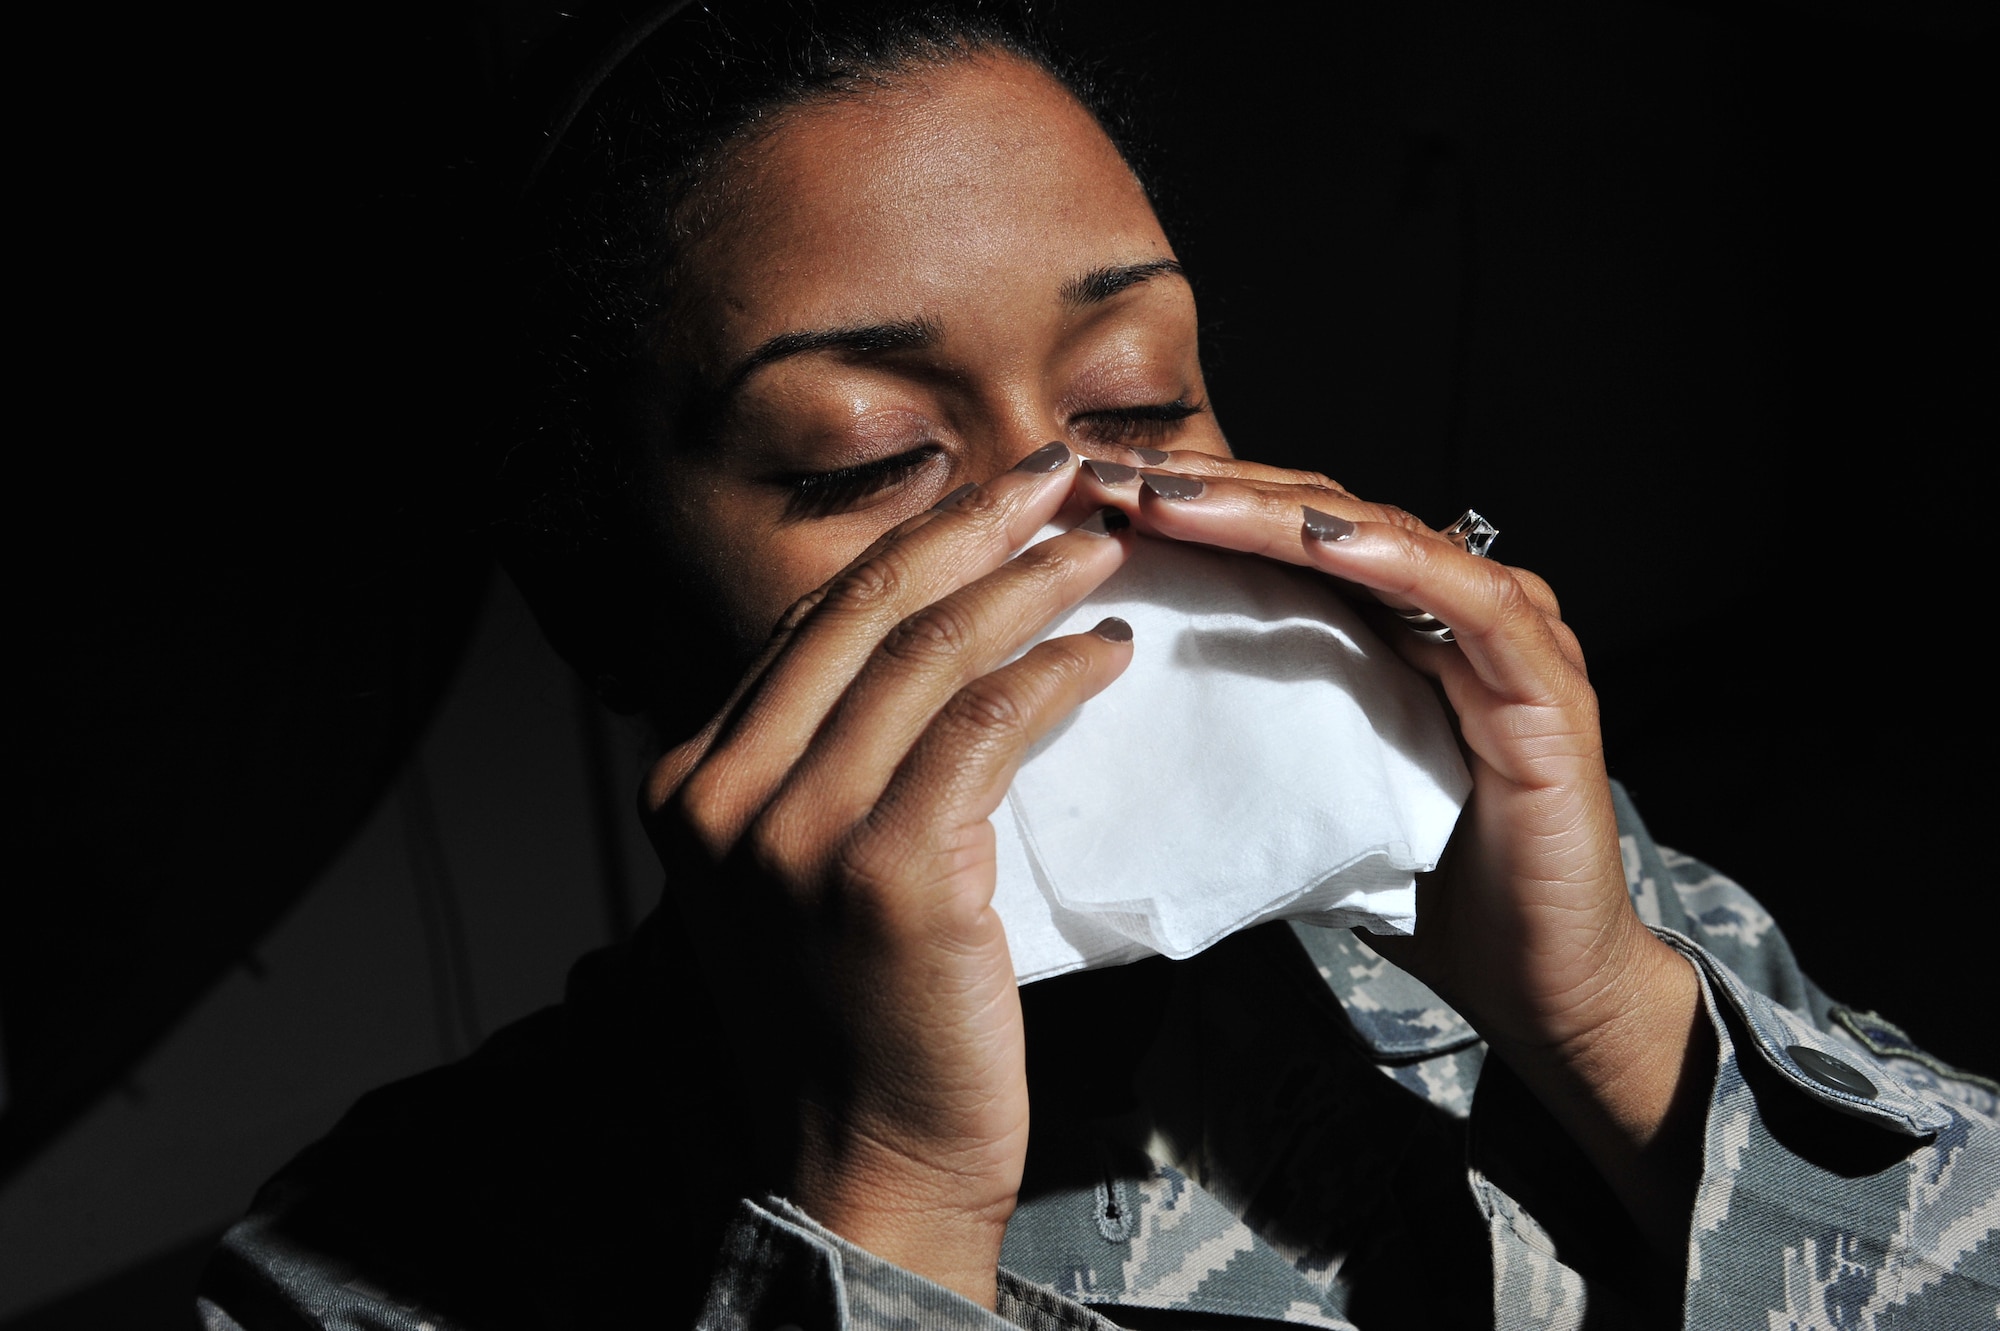 Pollen producing trees can cause allergies during the springtime.Symptoms include sneezing, runny nose, congestion, itchy and watery eyes.  These symptoms may range from being mildly annoying to severely impacting day-to-day life. (U.S. Air Force photo/Senior Airman Tristin English)